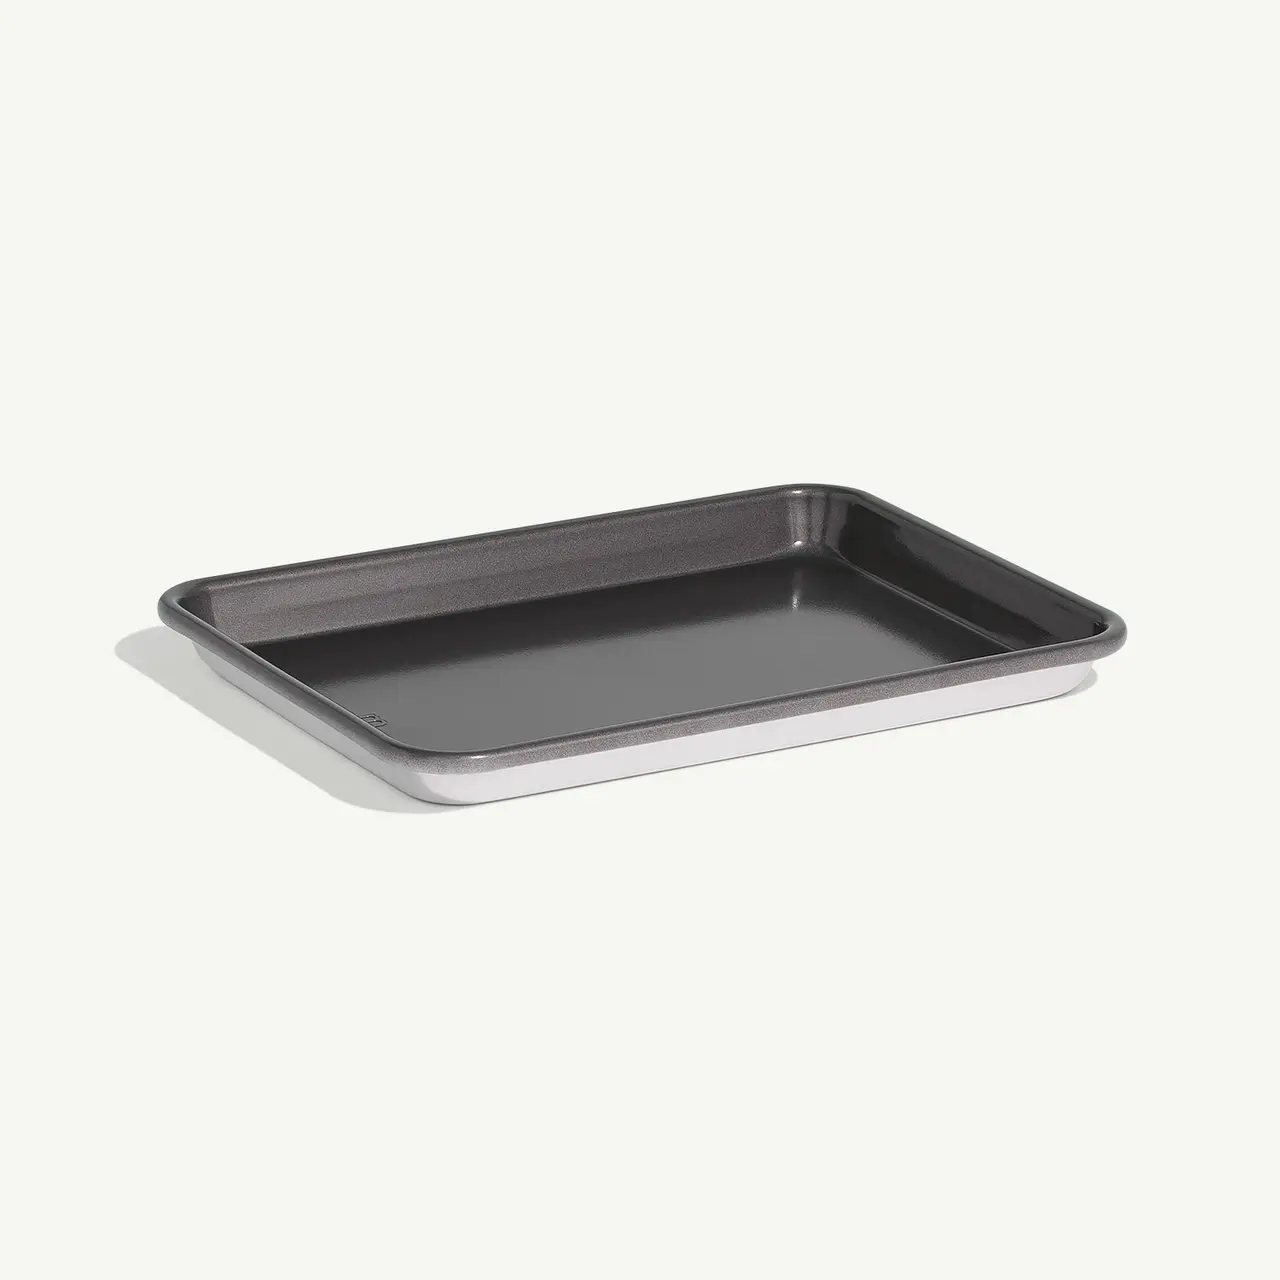 A simple metal baking tray is displayed against a light background.